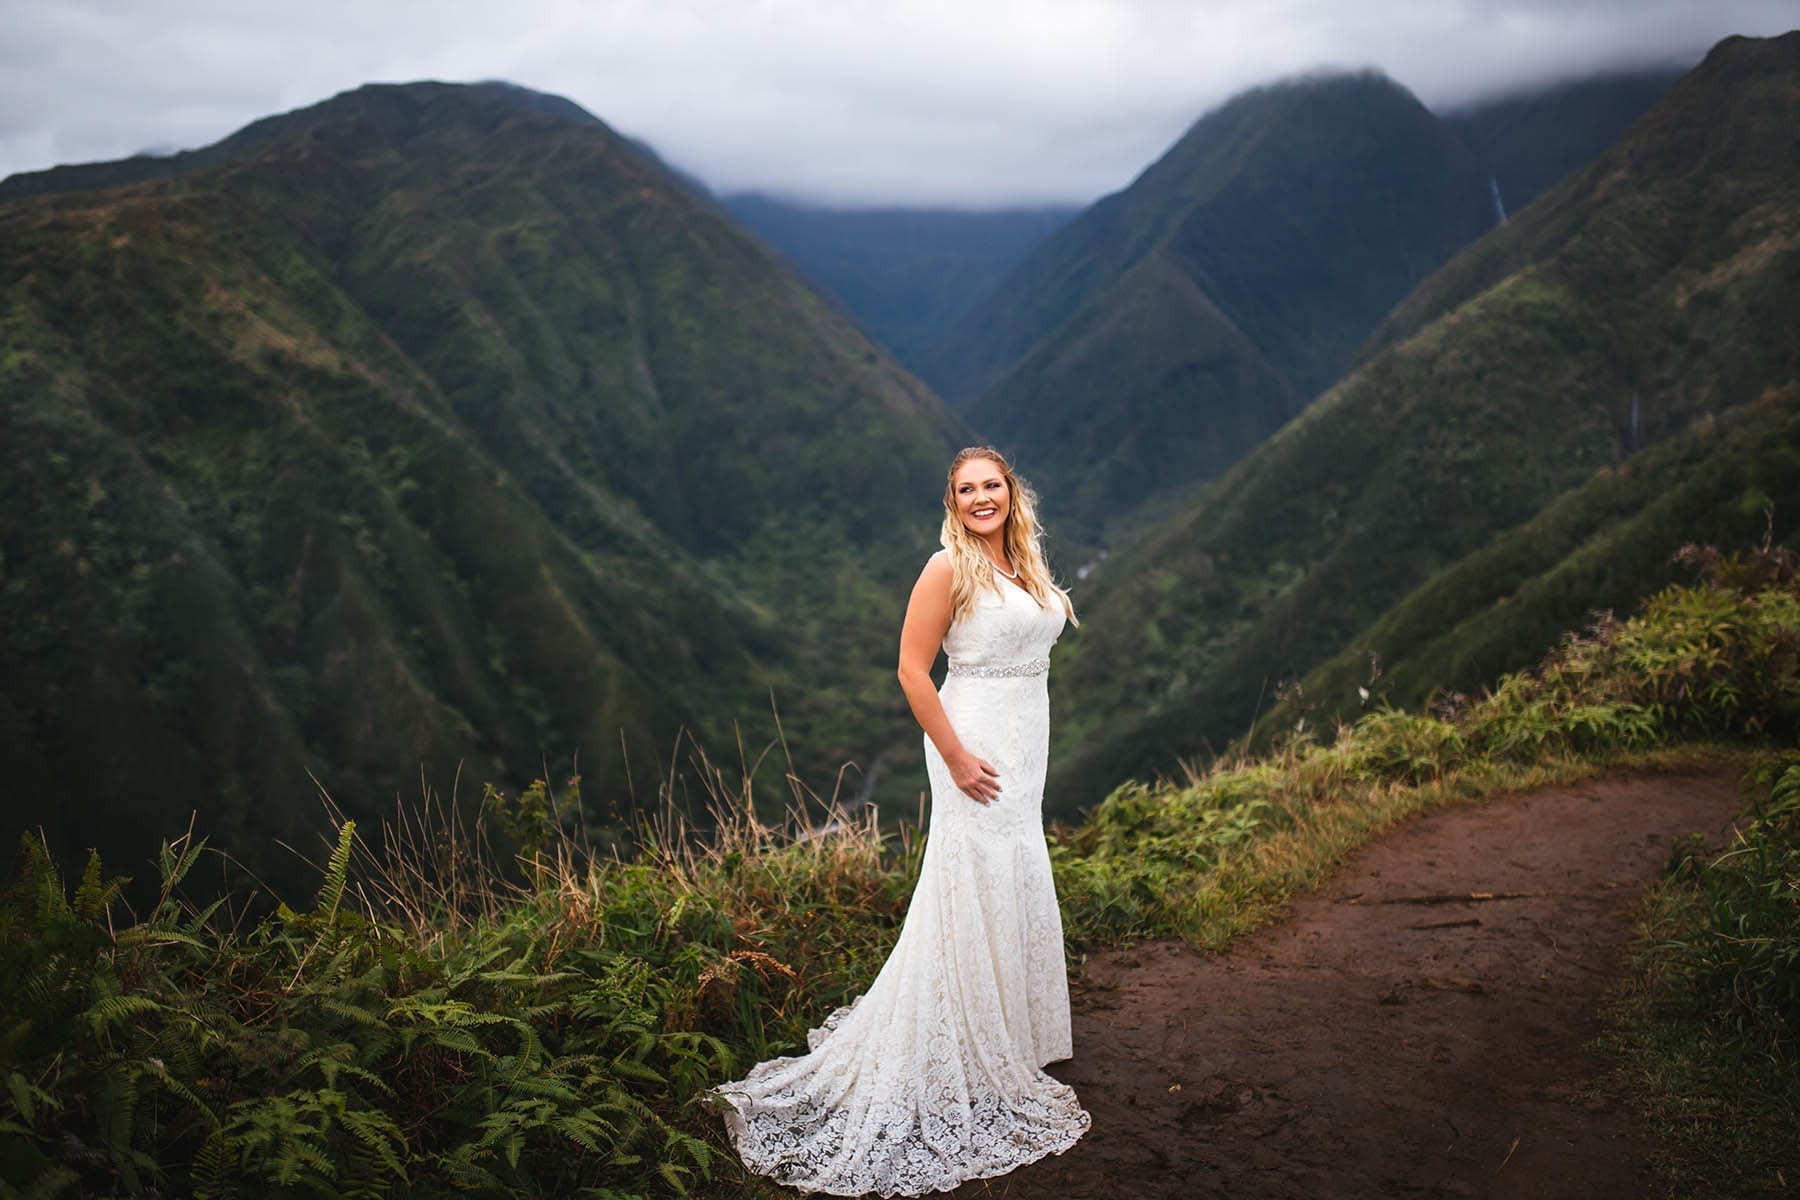 Best photo shoot locations in Maui